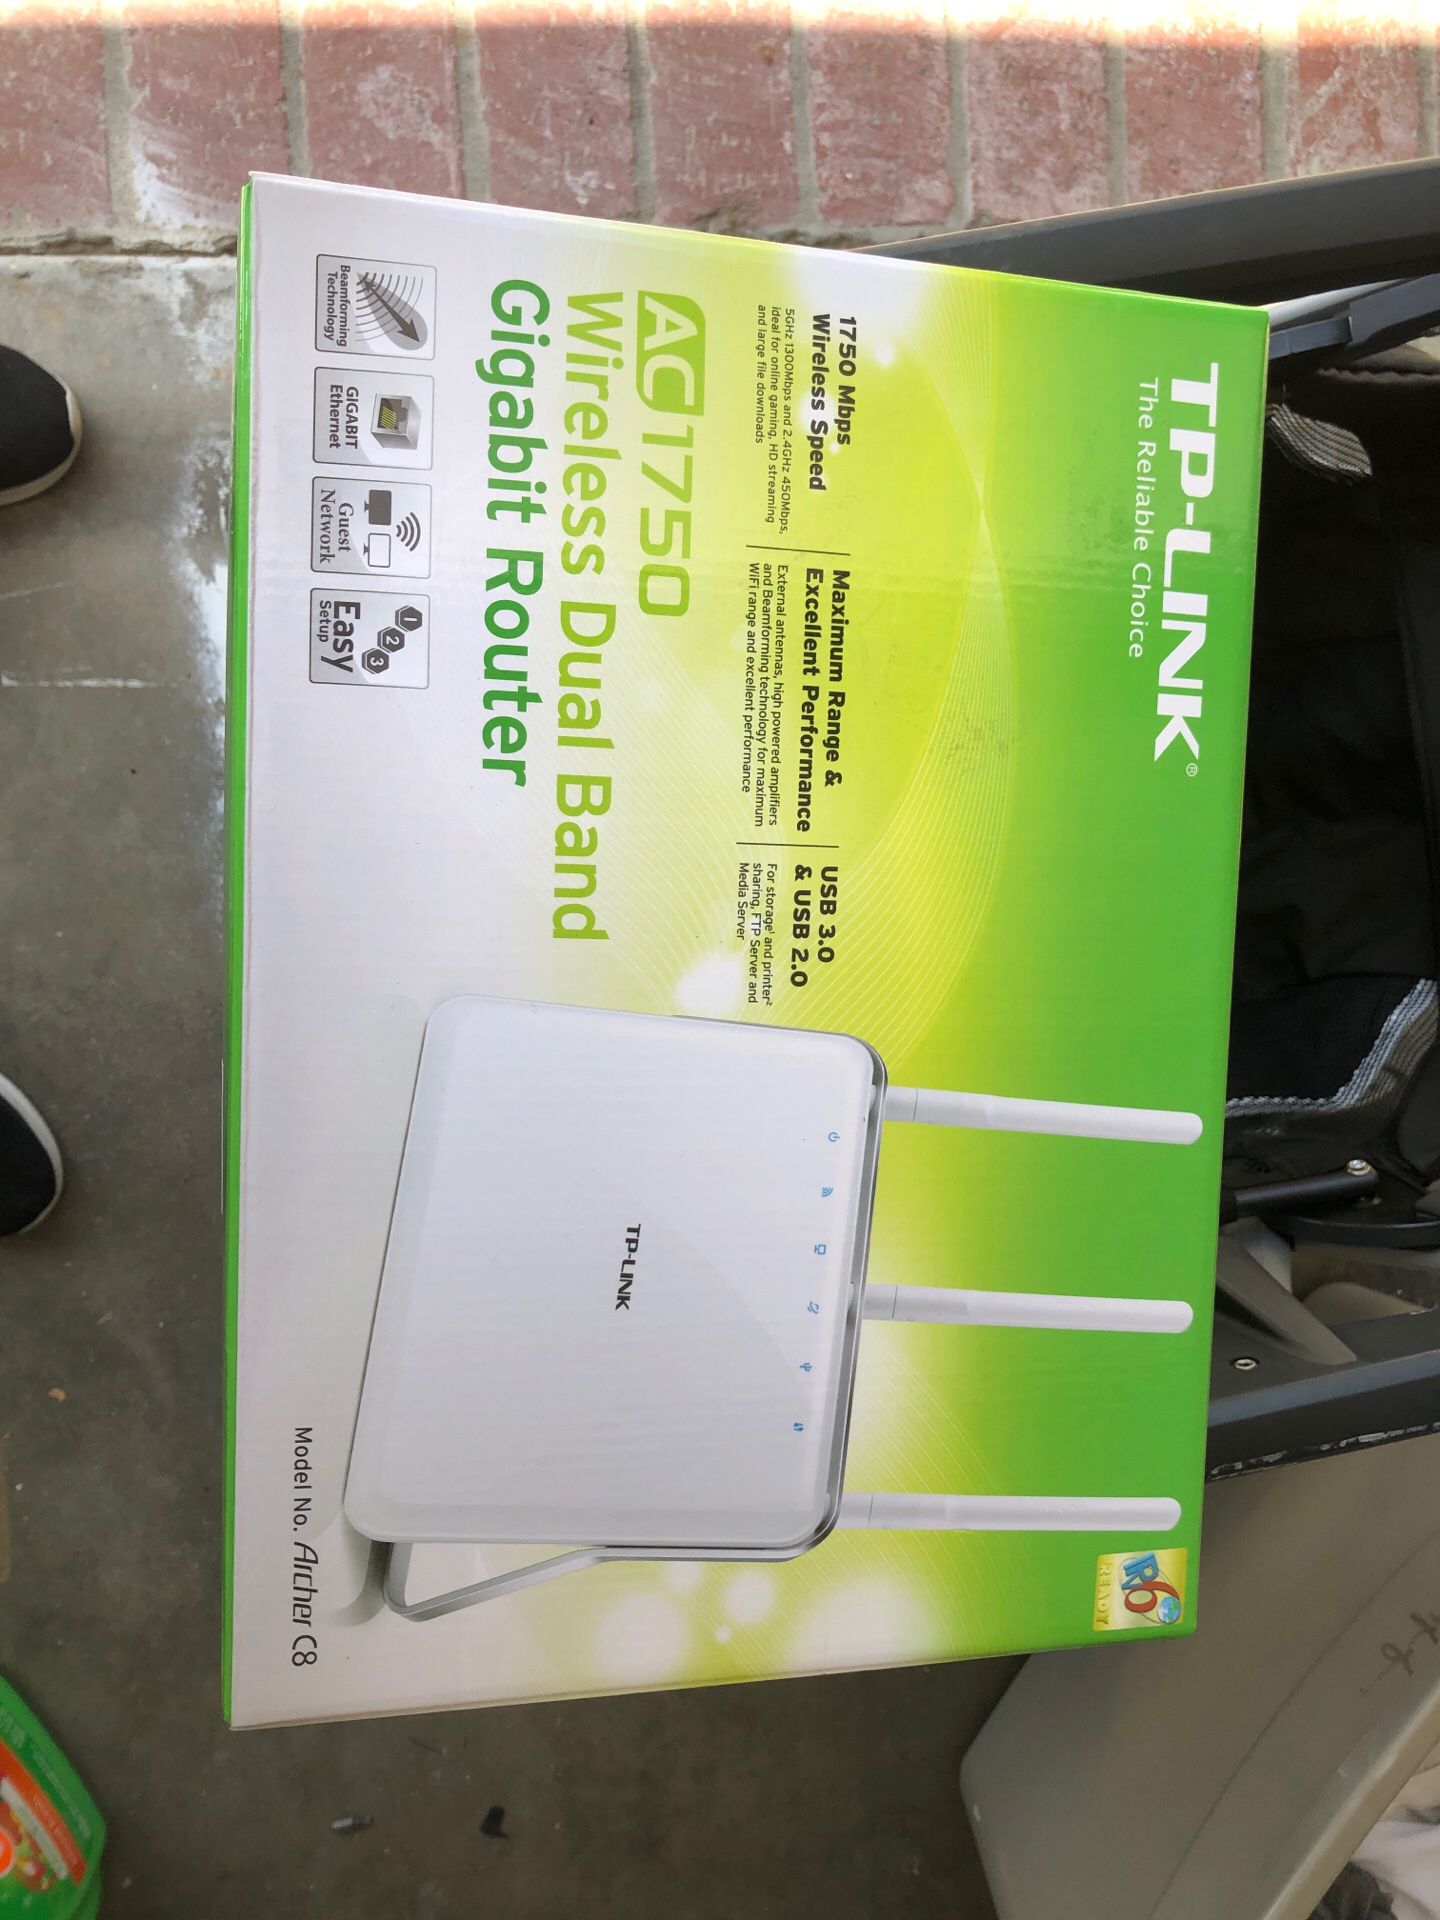 Brand new router in box